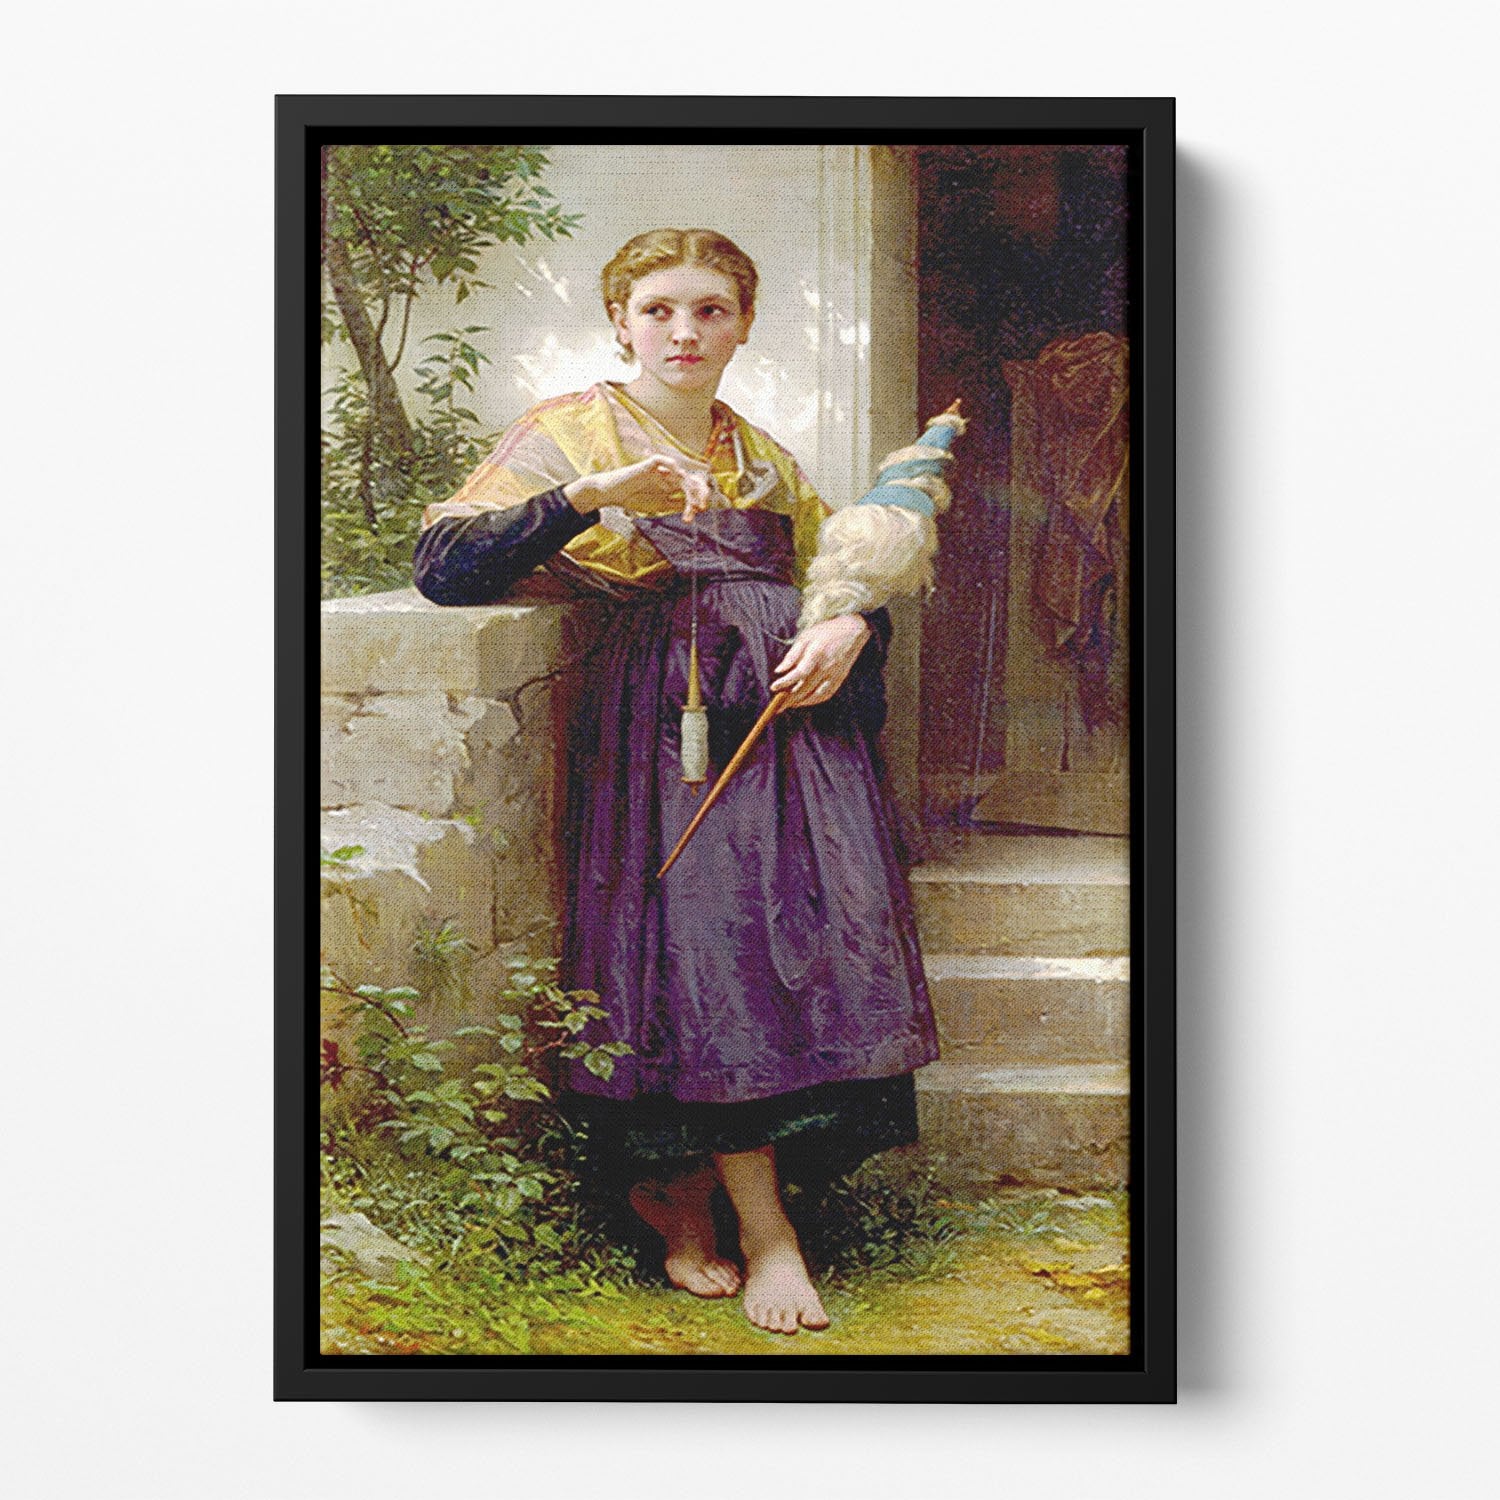 The Spinne By Bouguereau Floating Framed Canvas